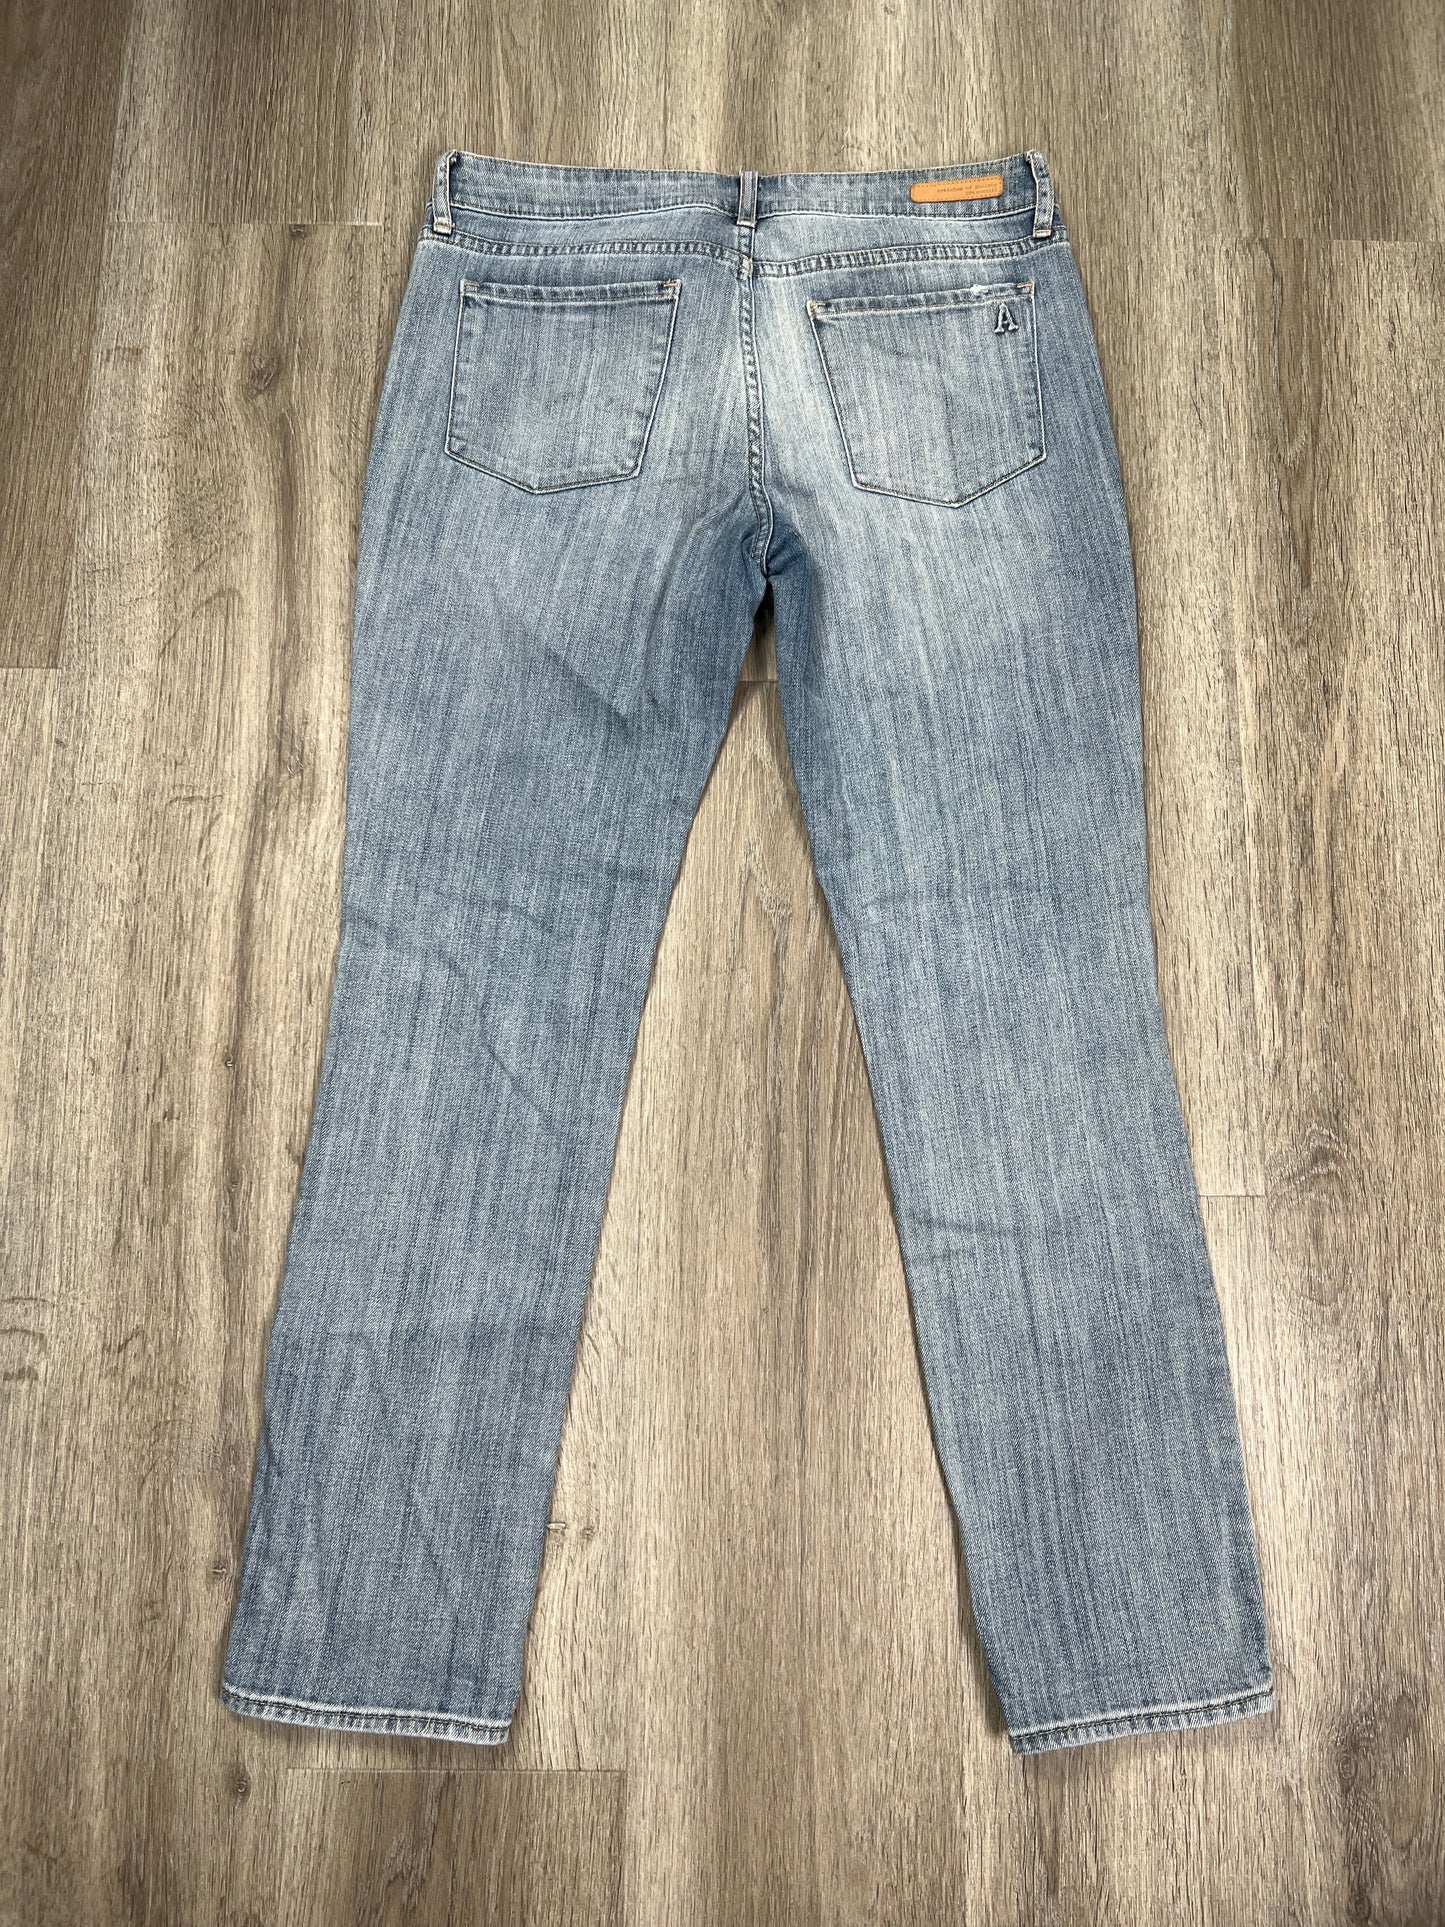 Blue Jeans Cropped Articles Of Society, Size 8